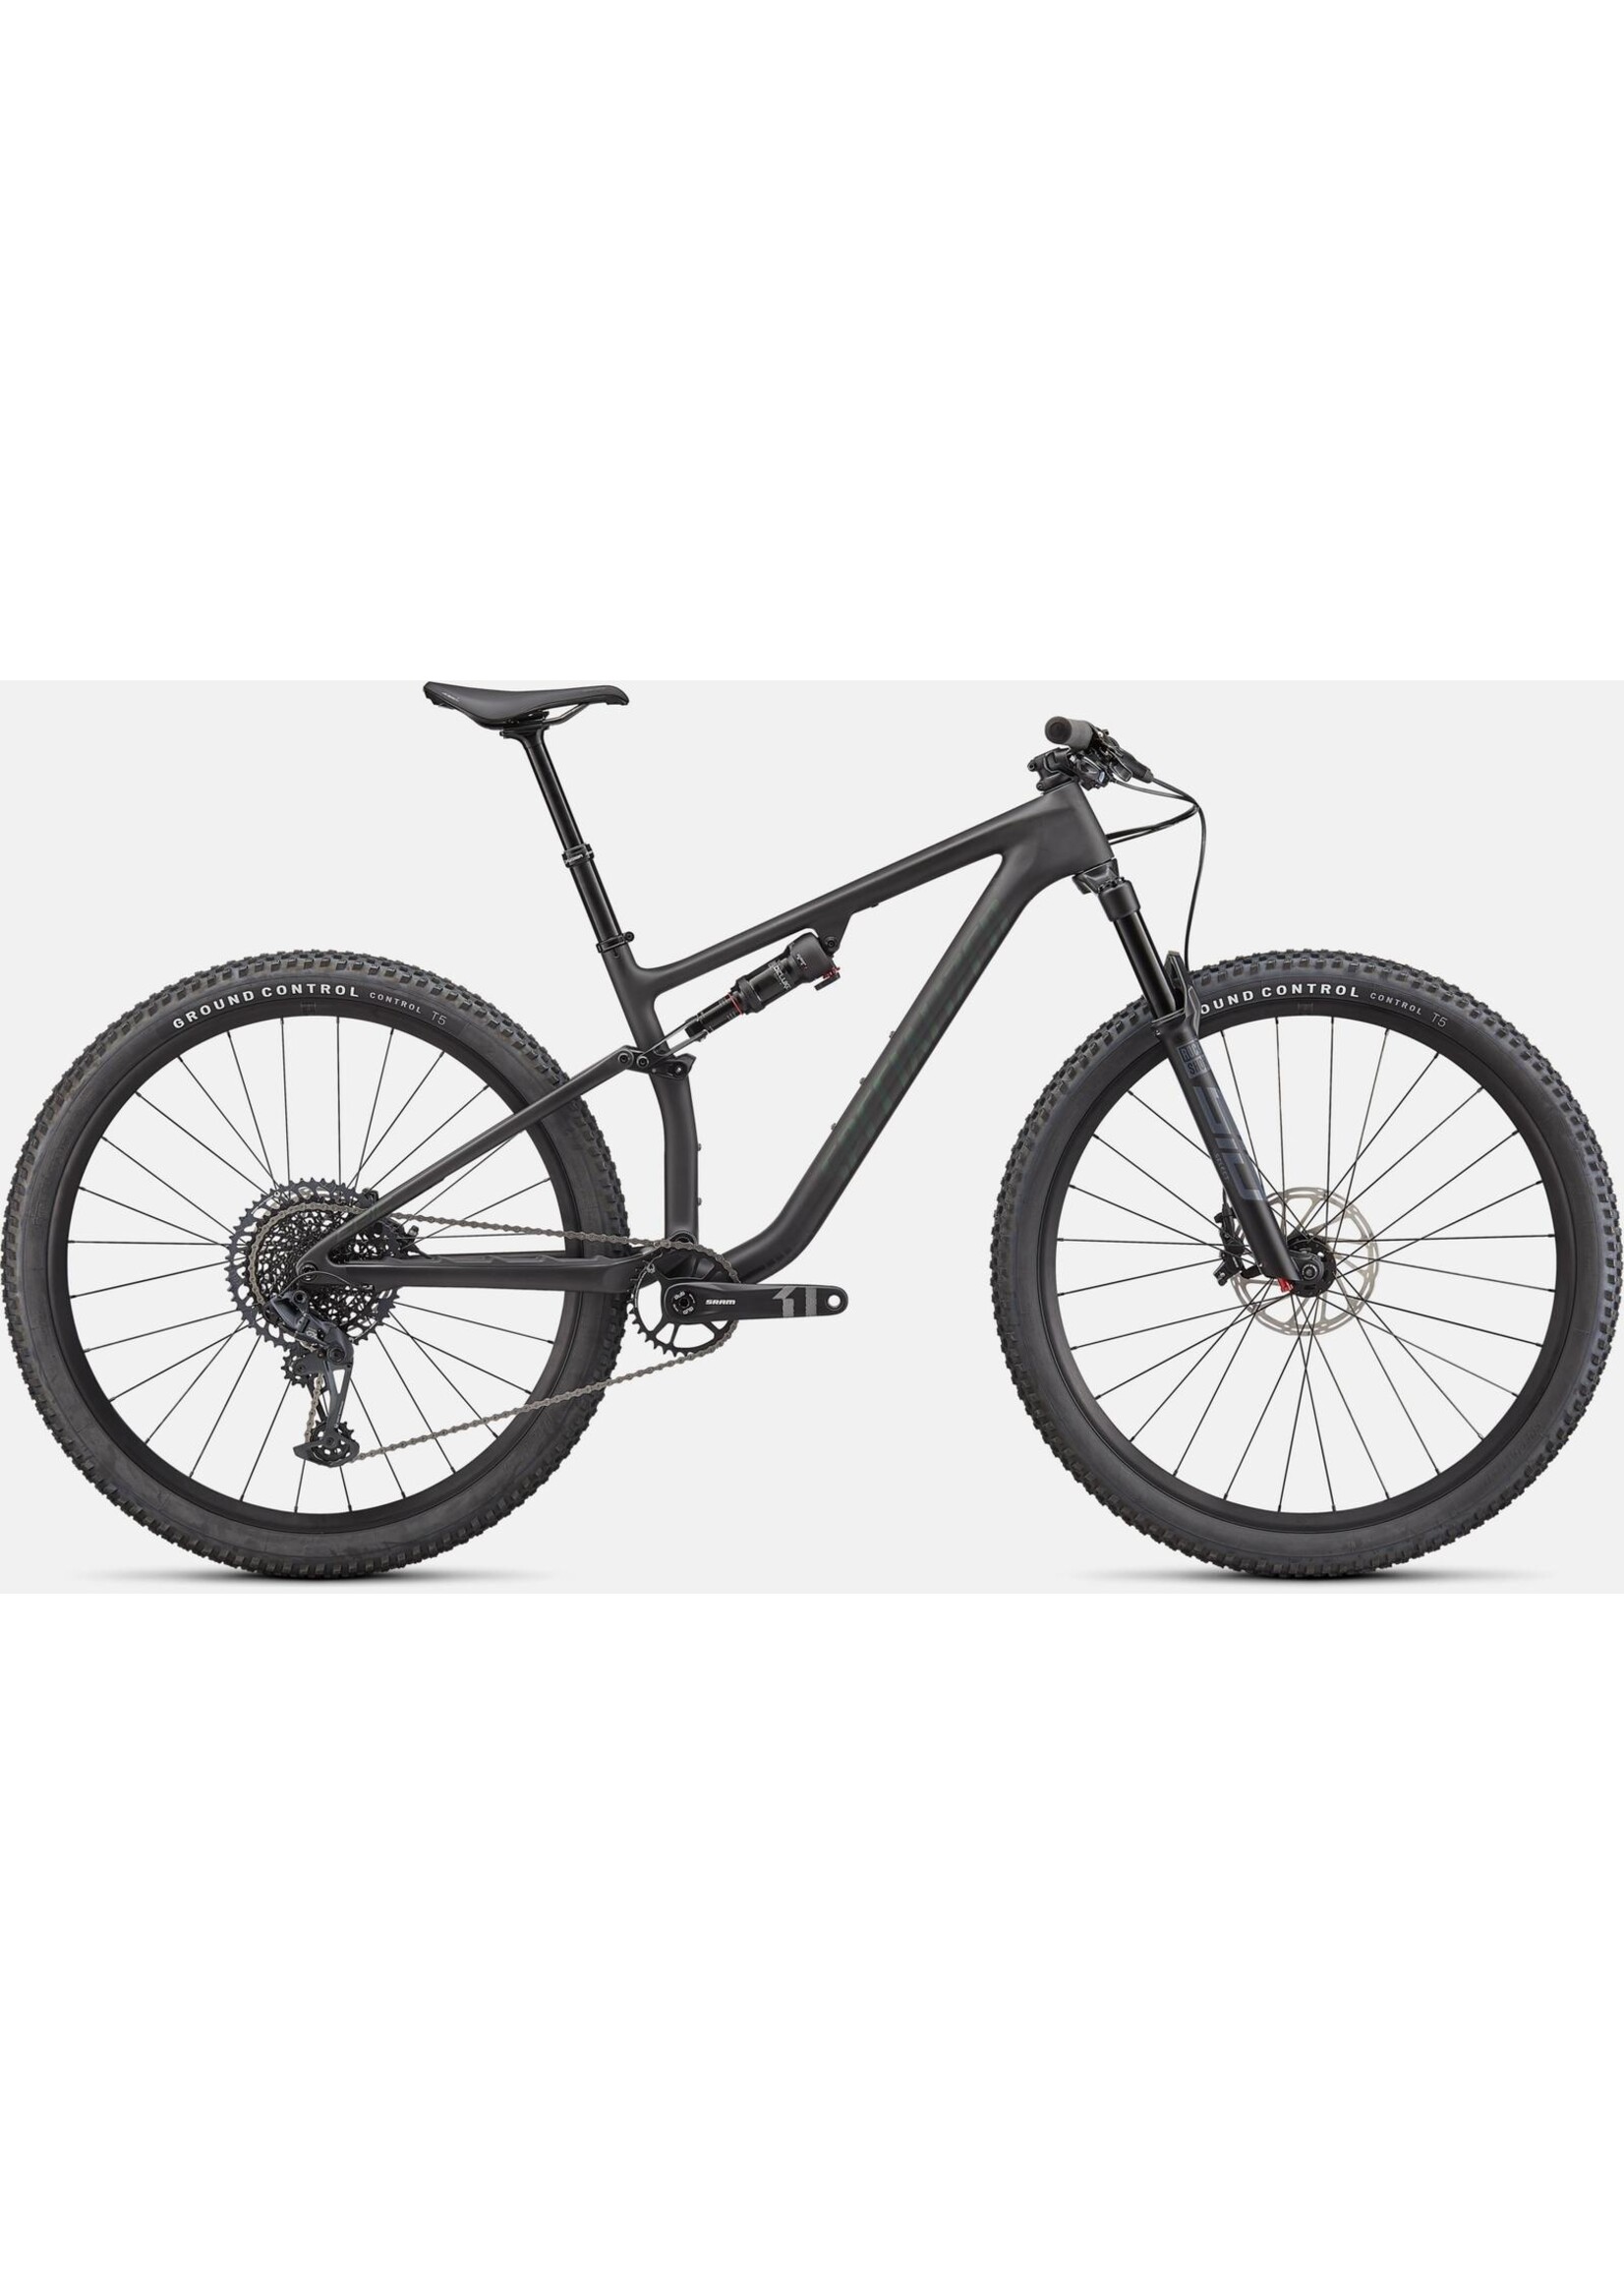 Specialized Epic Evo Comp Carbon